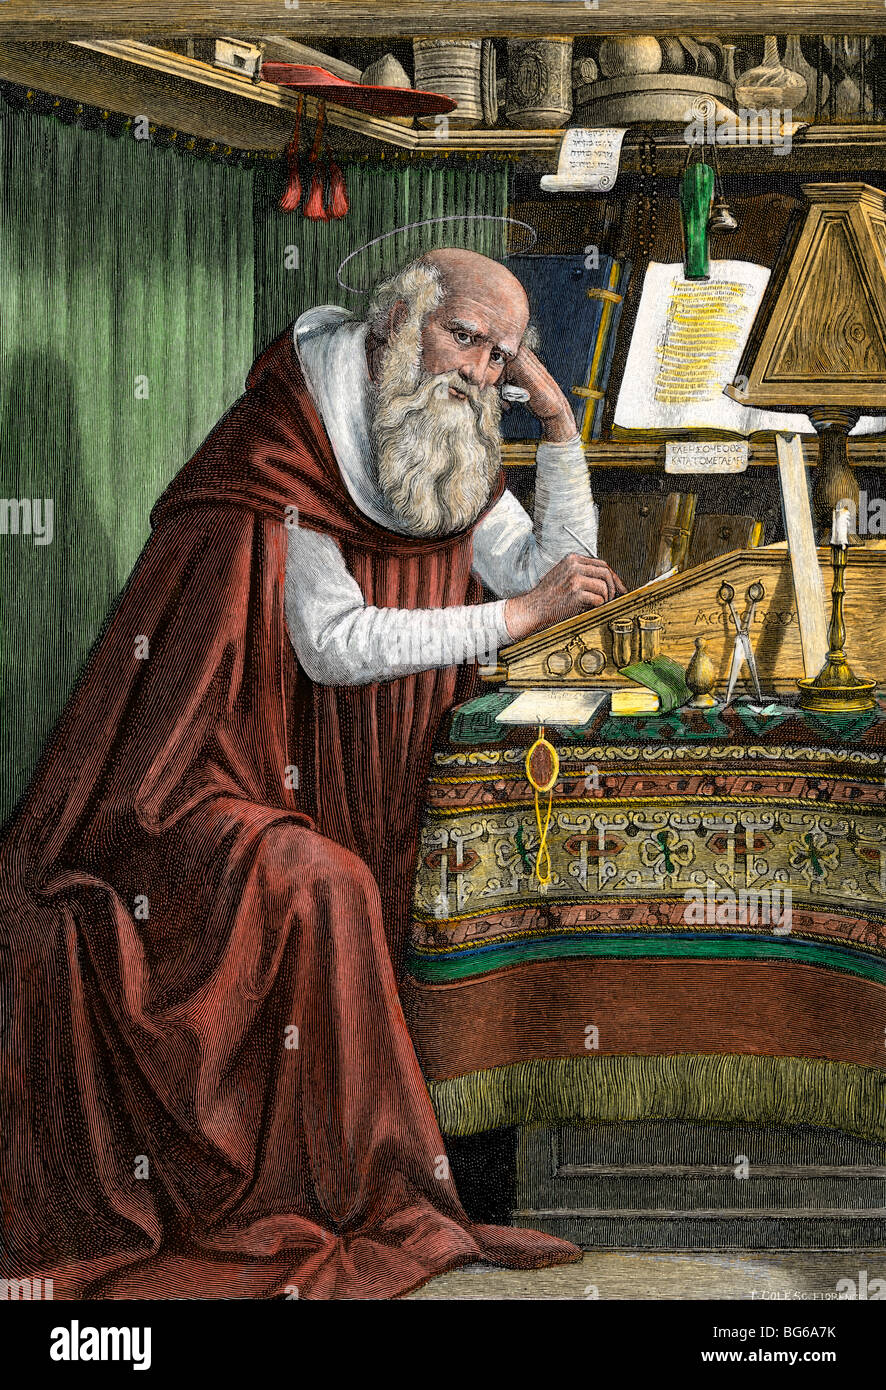 Saint Jerome translating the Bible into Latin, known as the Vulgate Bible. Hand-colored woodcut Stock Photo